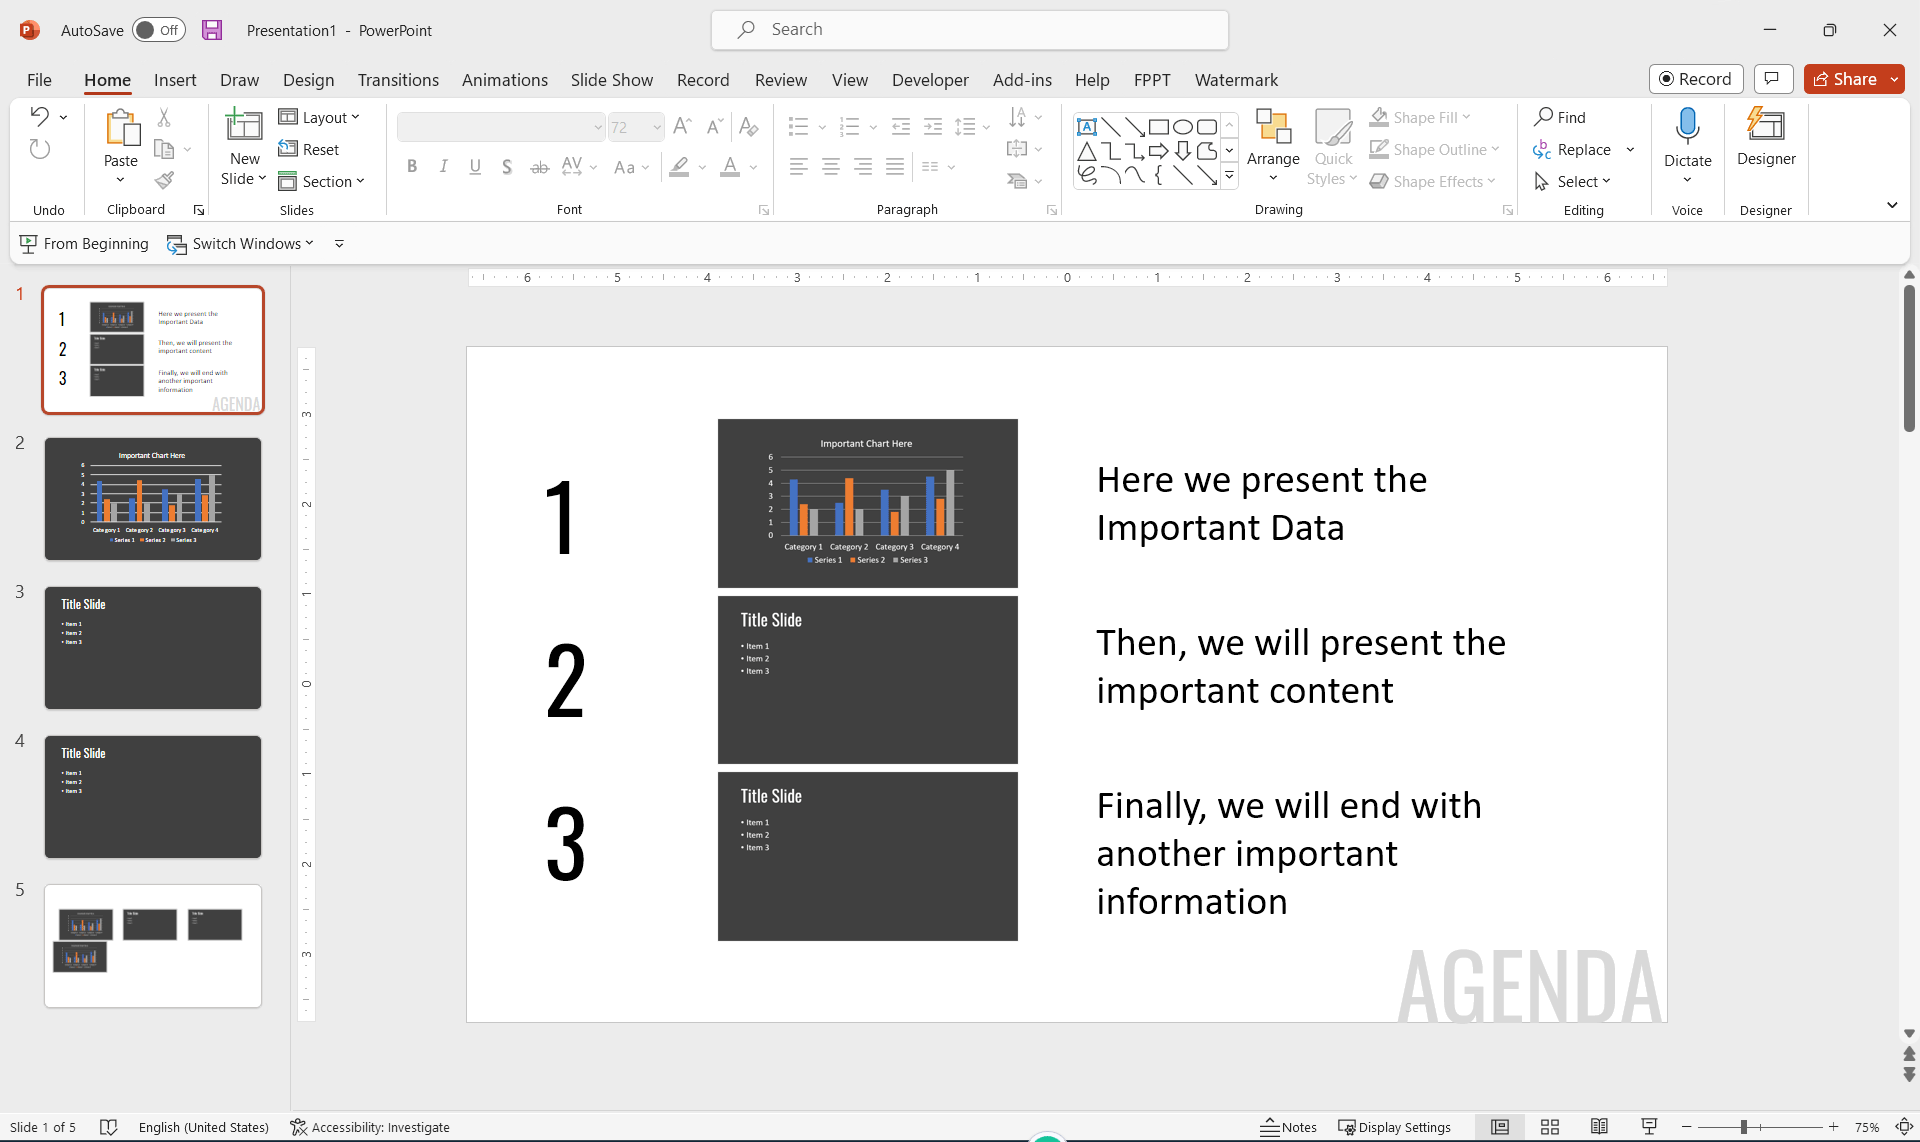 Creating a Visual Table of Contents with Minuature Slides in PowerPoint - An atlernative to traditional Agenda slides